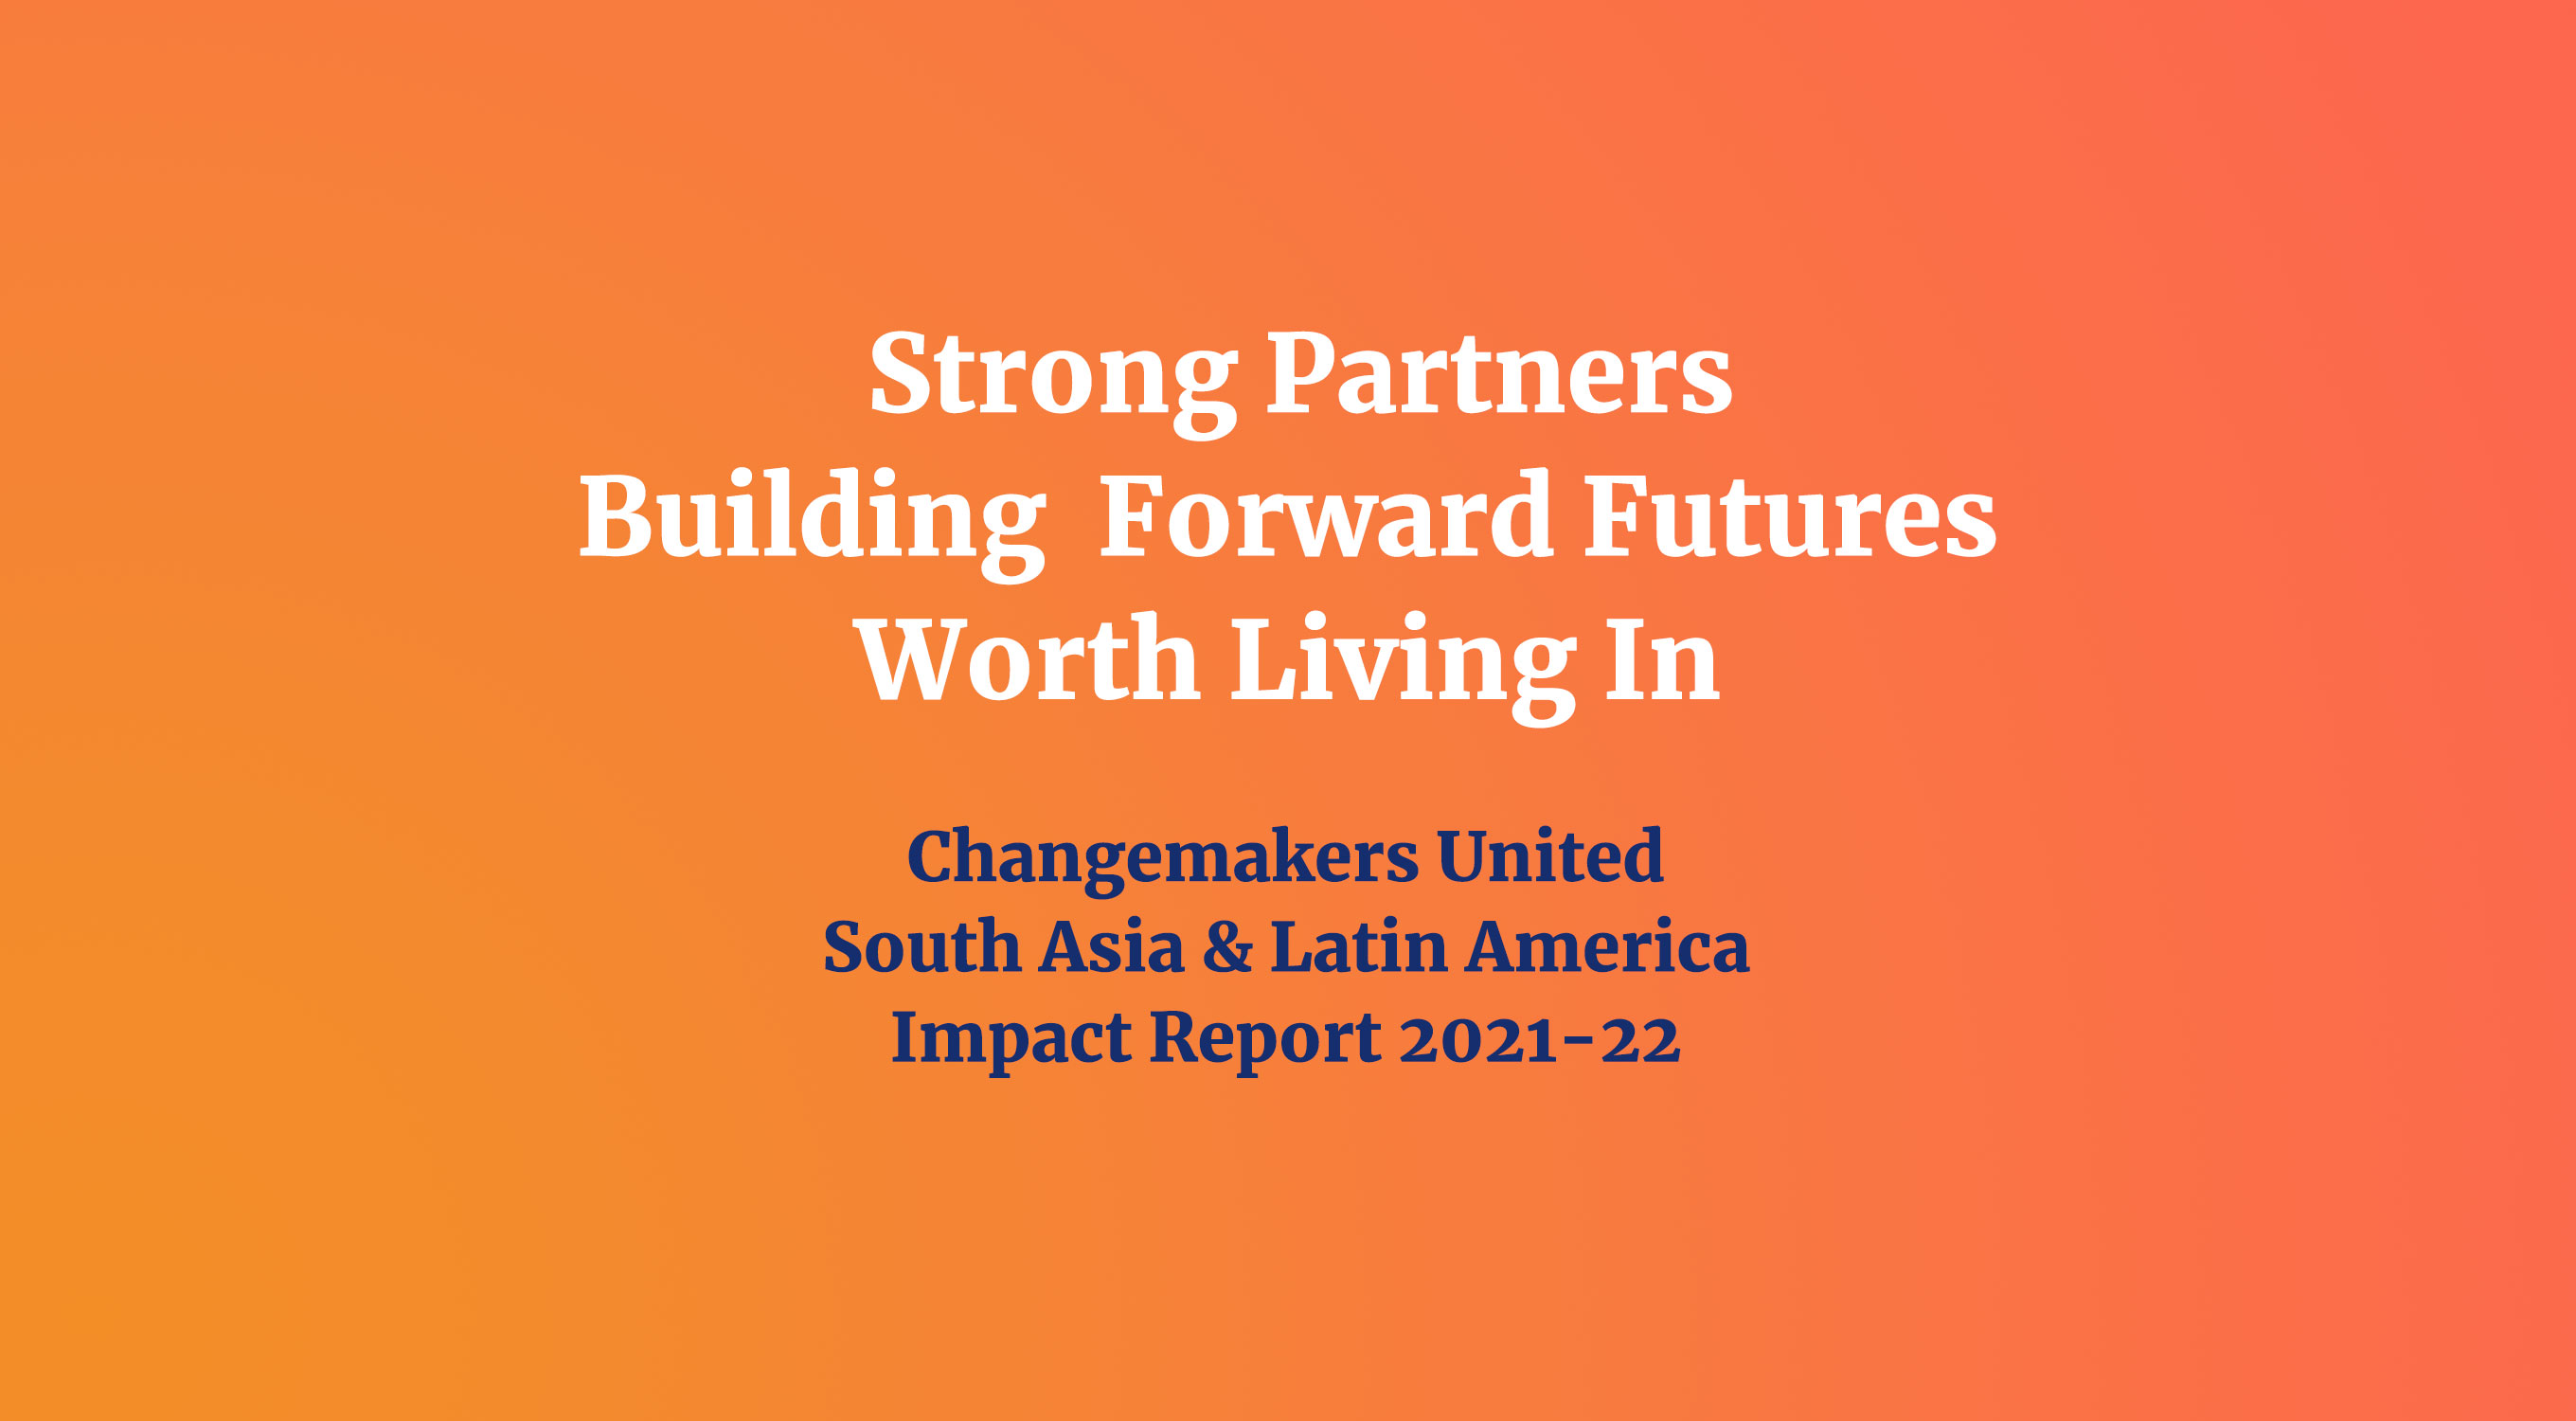 An orange gradient background with the text "Strong Partners Building Forward Futures Worth Living In" in white, and "Changemakers United South Asia & Latin America Impact Report 2021-2022" in dark blue text underneath.